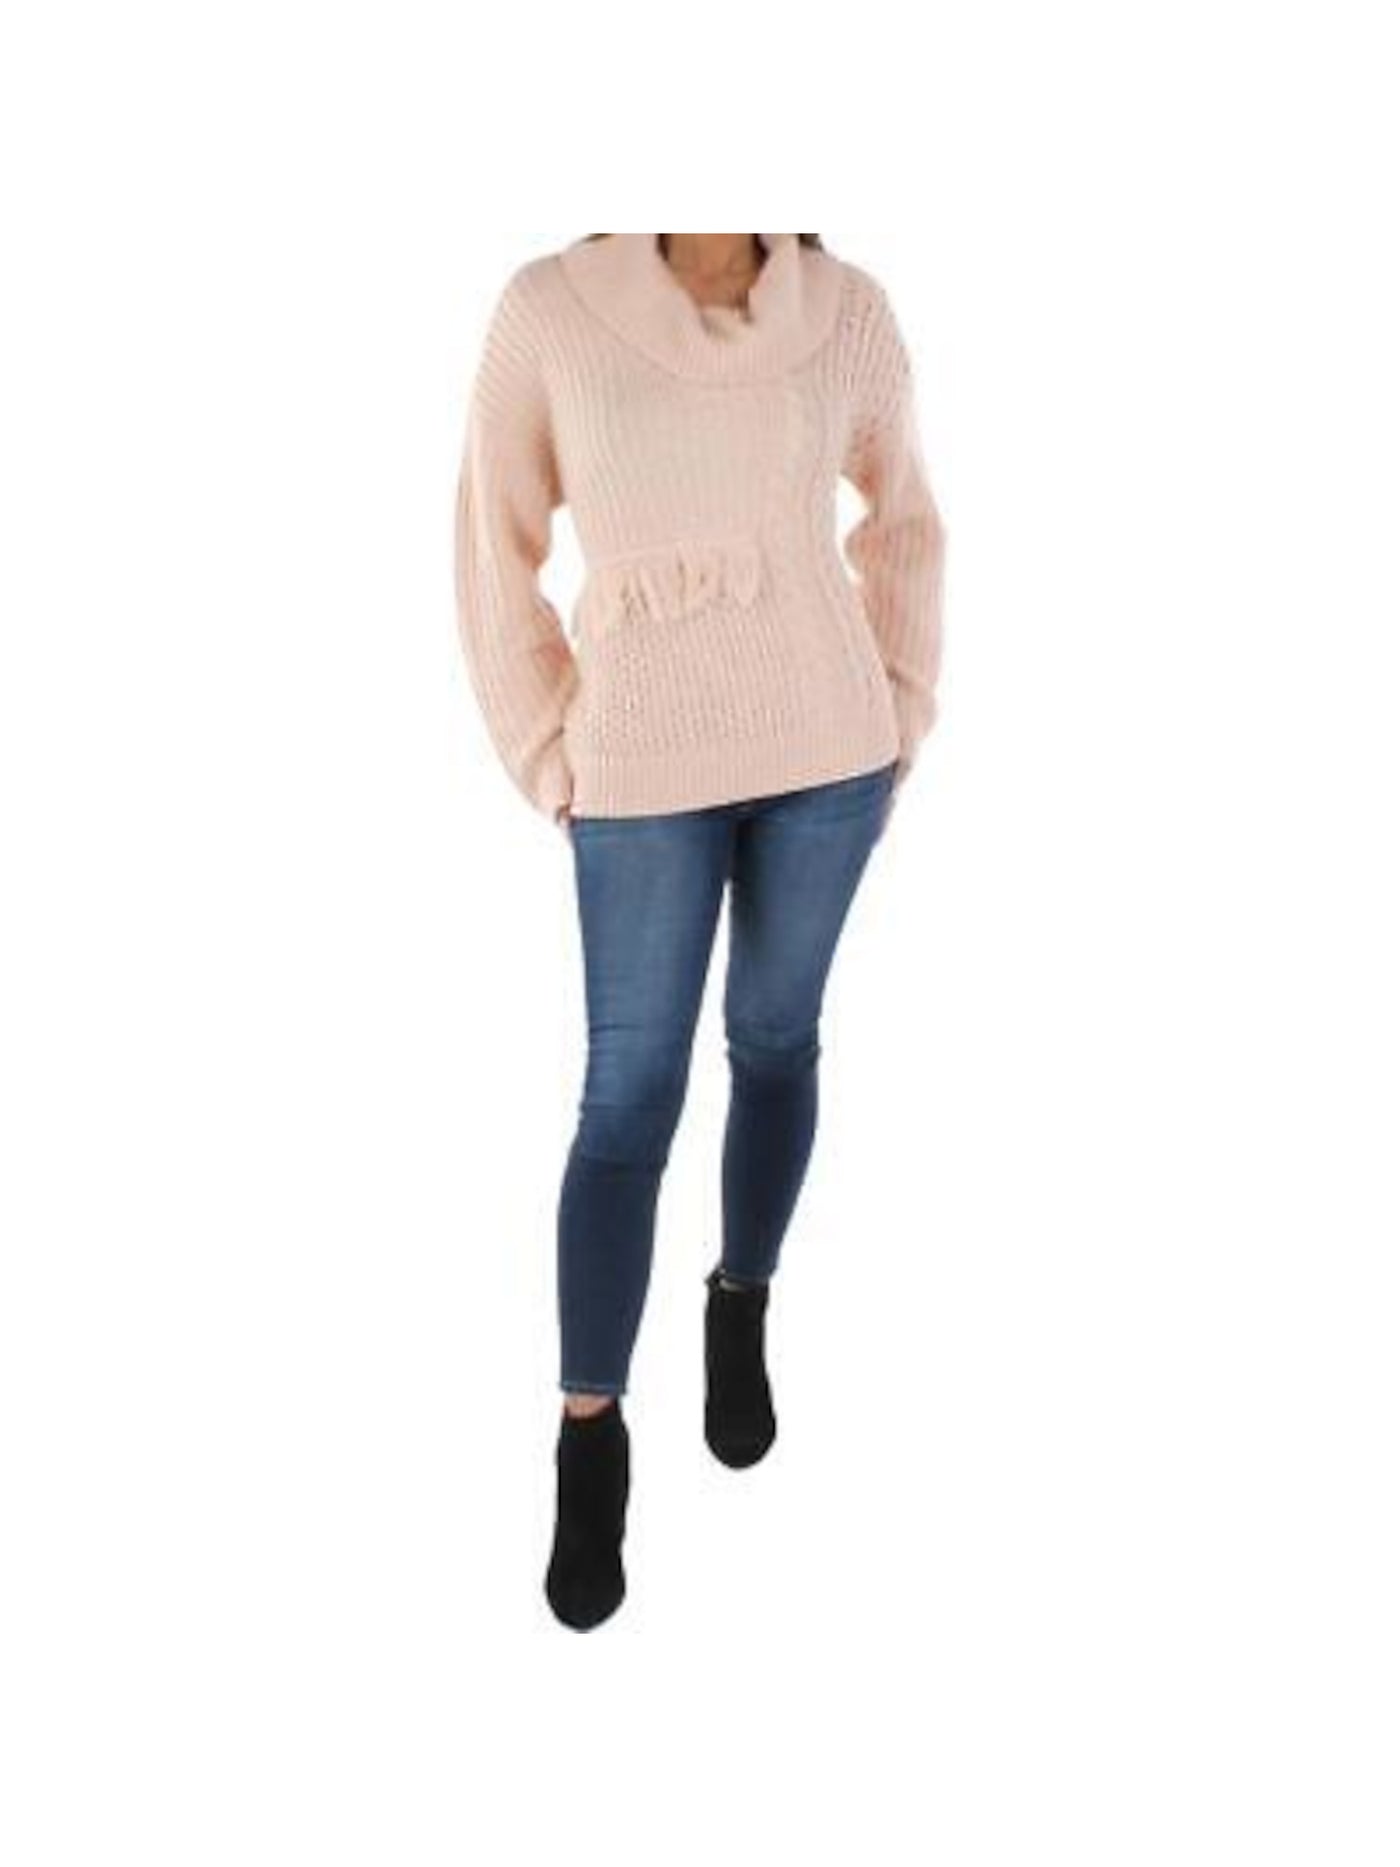 CALVIN KLEIN Womens Pink Fringed Mixed Knit Long Sleeve Cowl Neck Sweater S